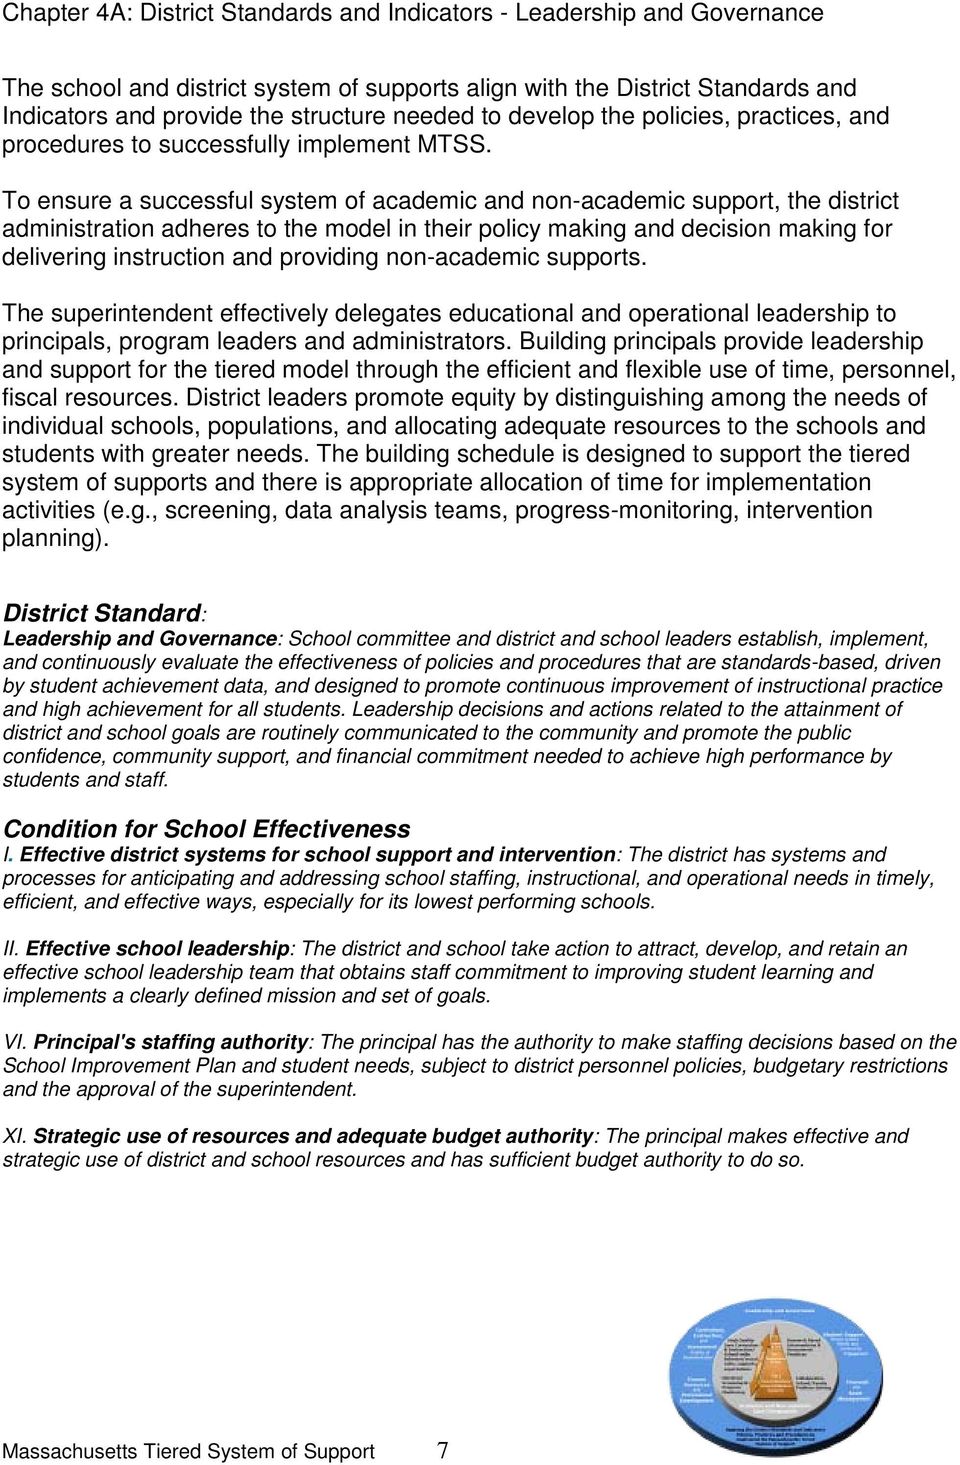 To ensure a successful system of academic and non-academic support, the district administration adheres to the model in their policy making and decision making for delivering instruction and